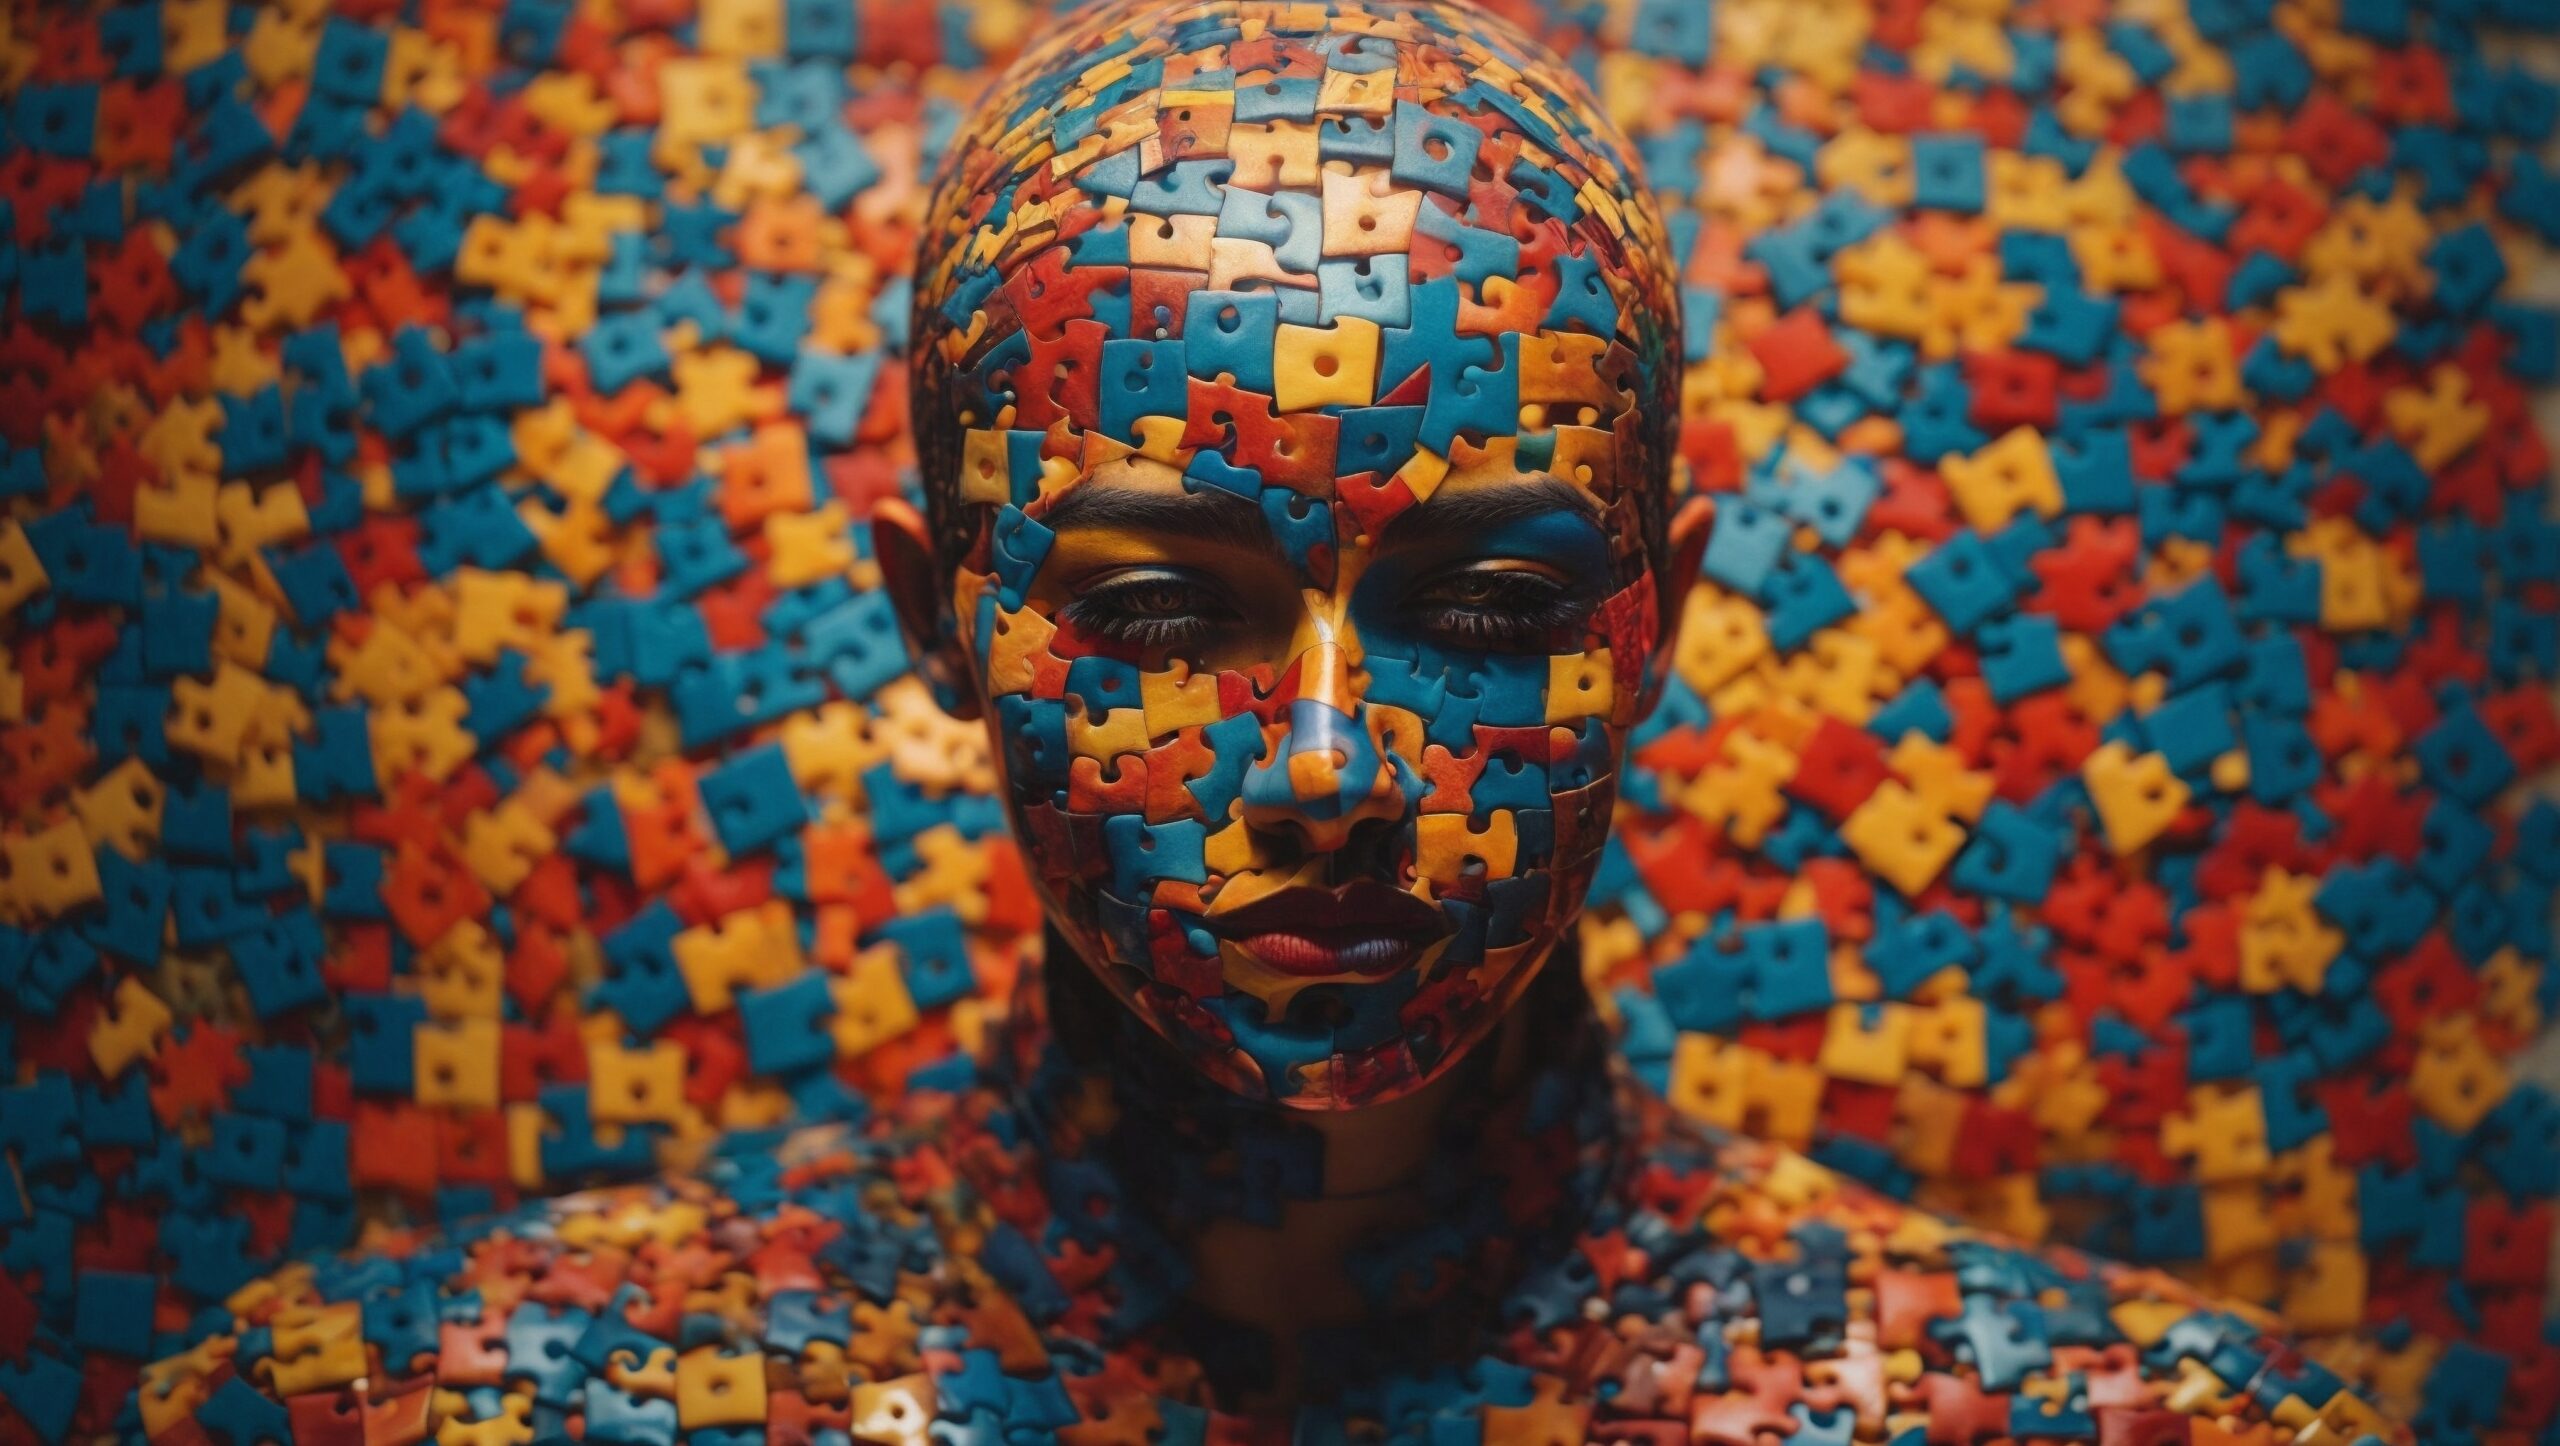 image of a human form made up of a mosaic